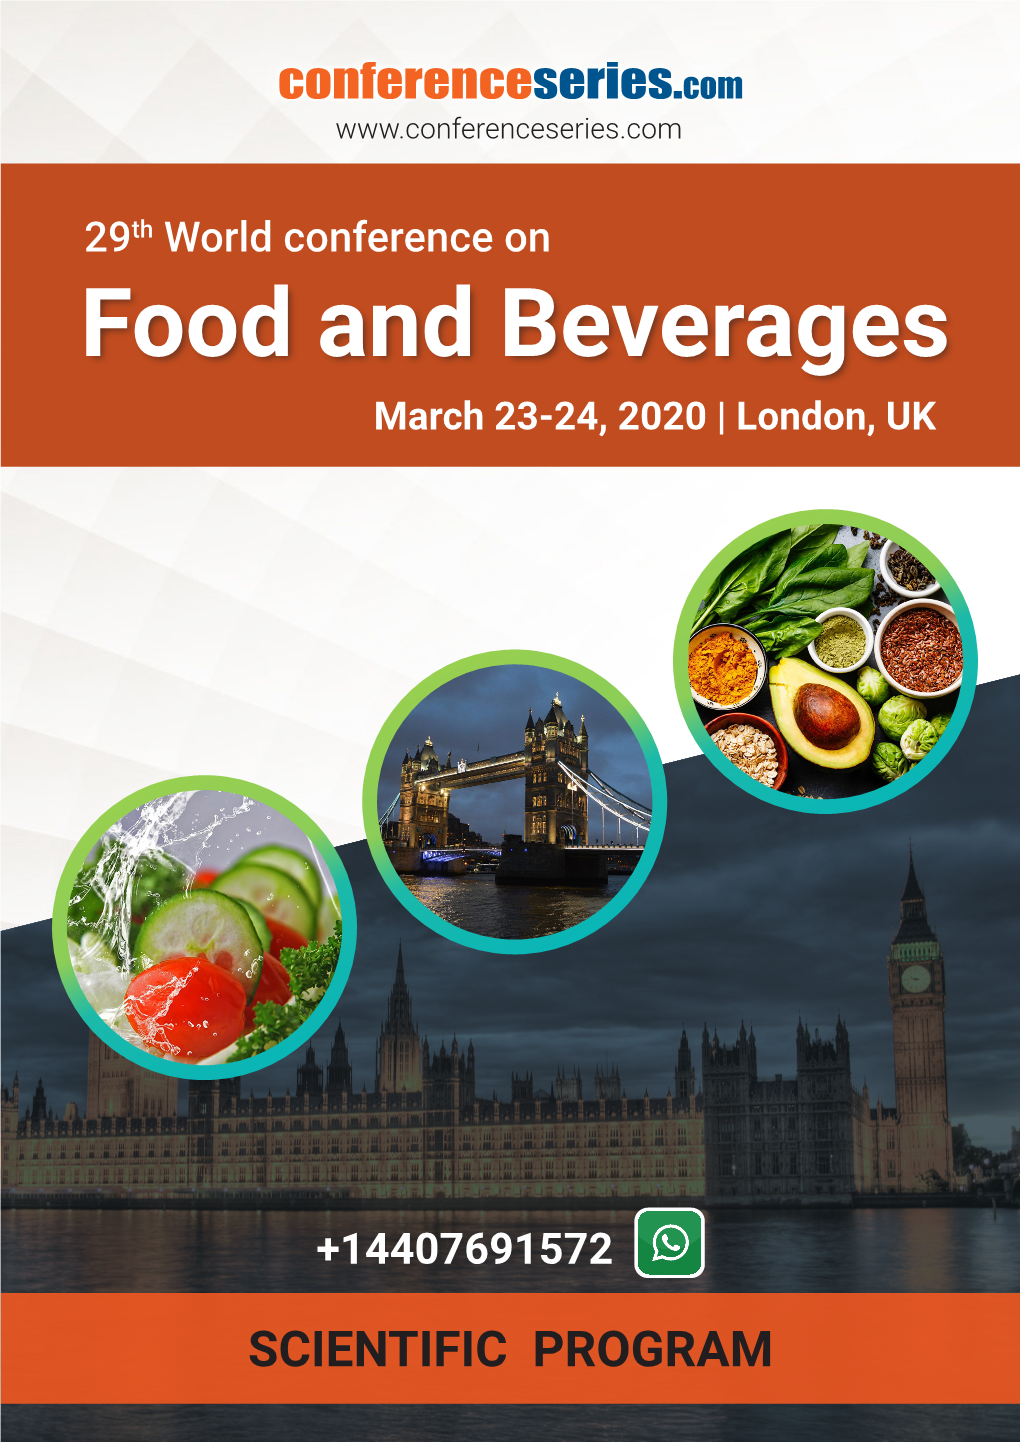 Food and Beverages March 23-24, 2020 | London, UK